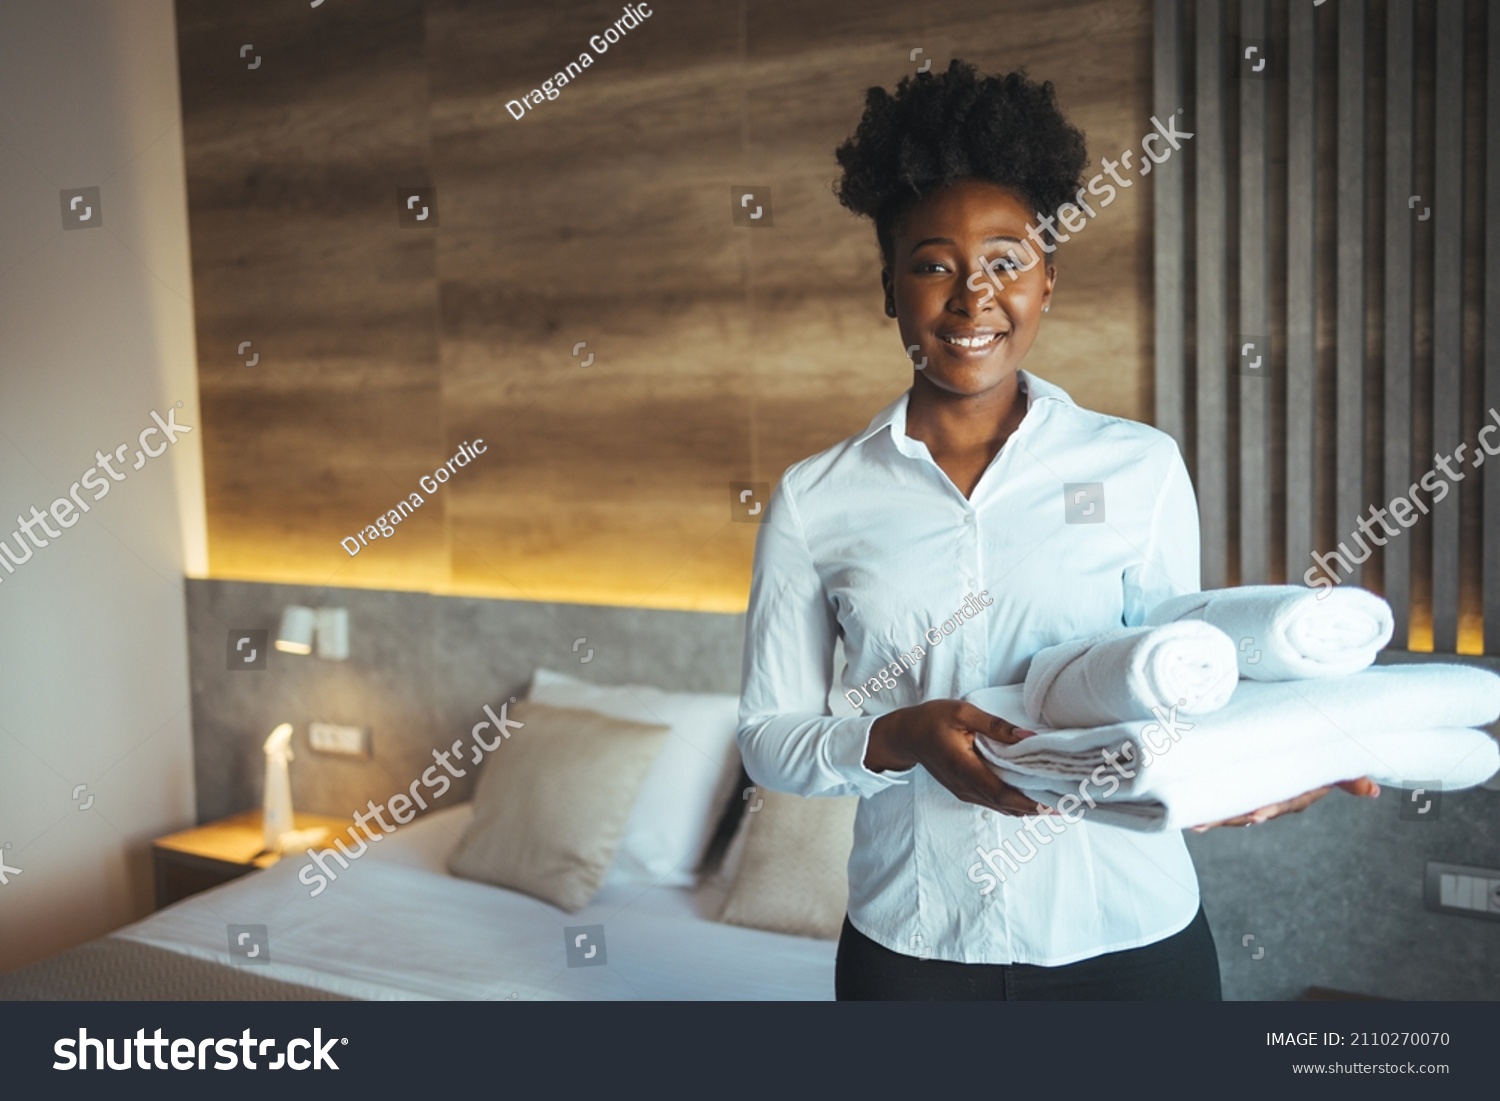 Hotel staff setting up pillow on bed. African housekeeper looking at the camera holding a towel a hotel room. Clean towels during housekeeping in a hotel room #2110270070